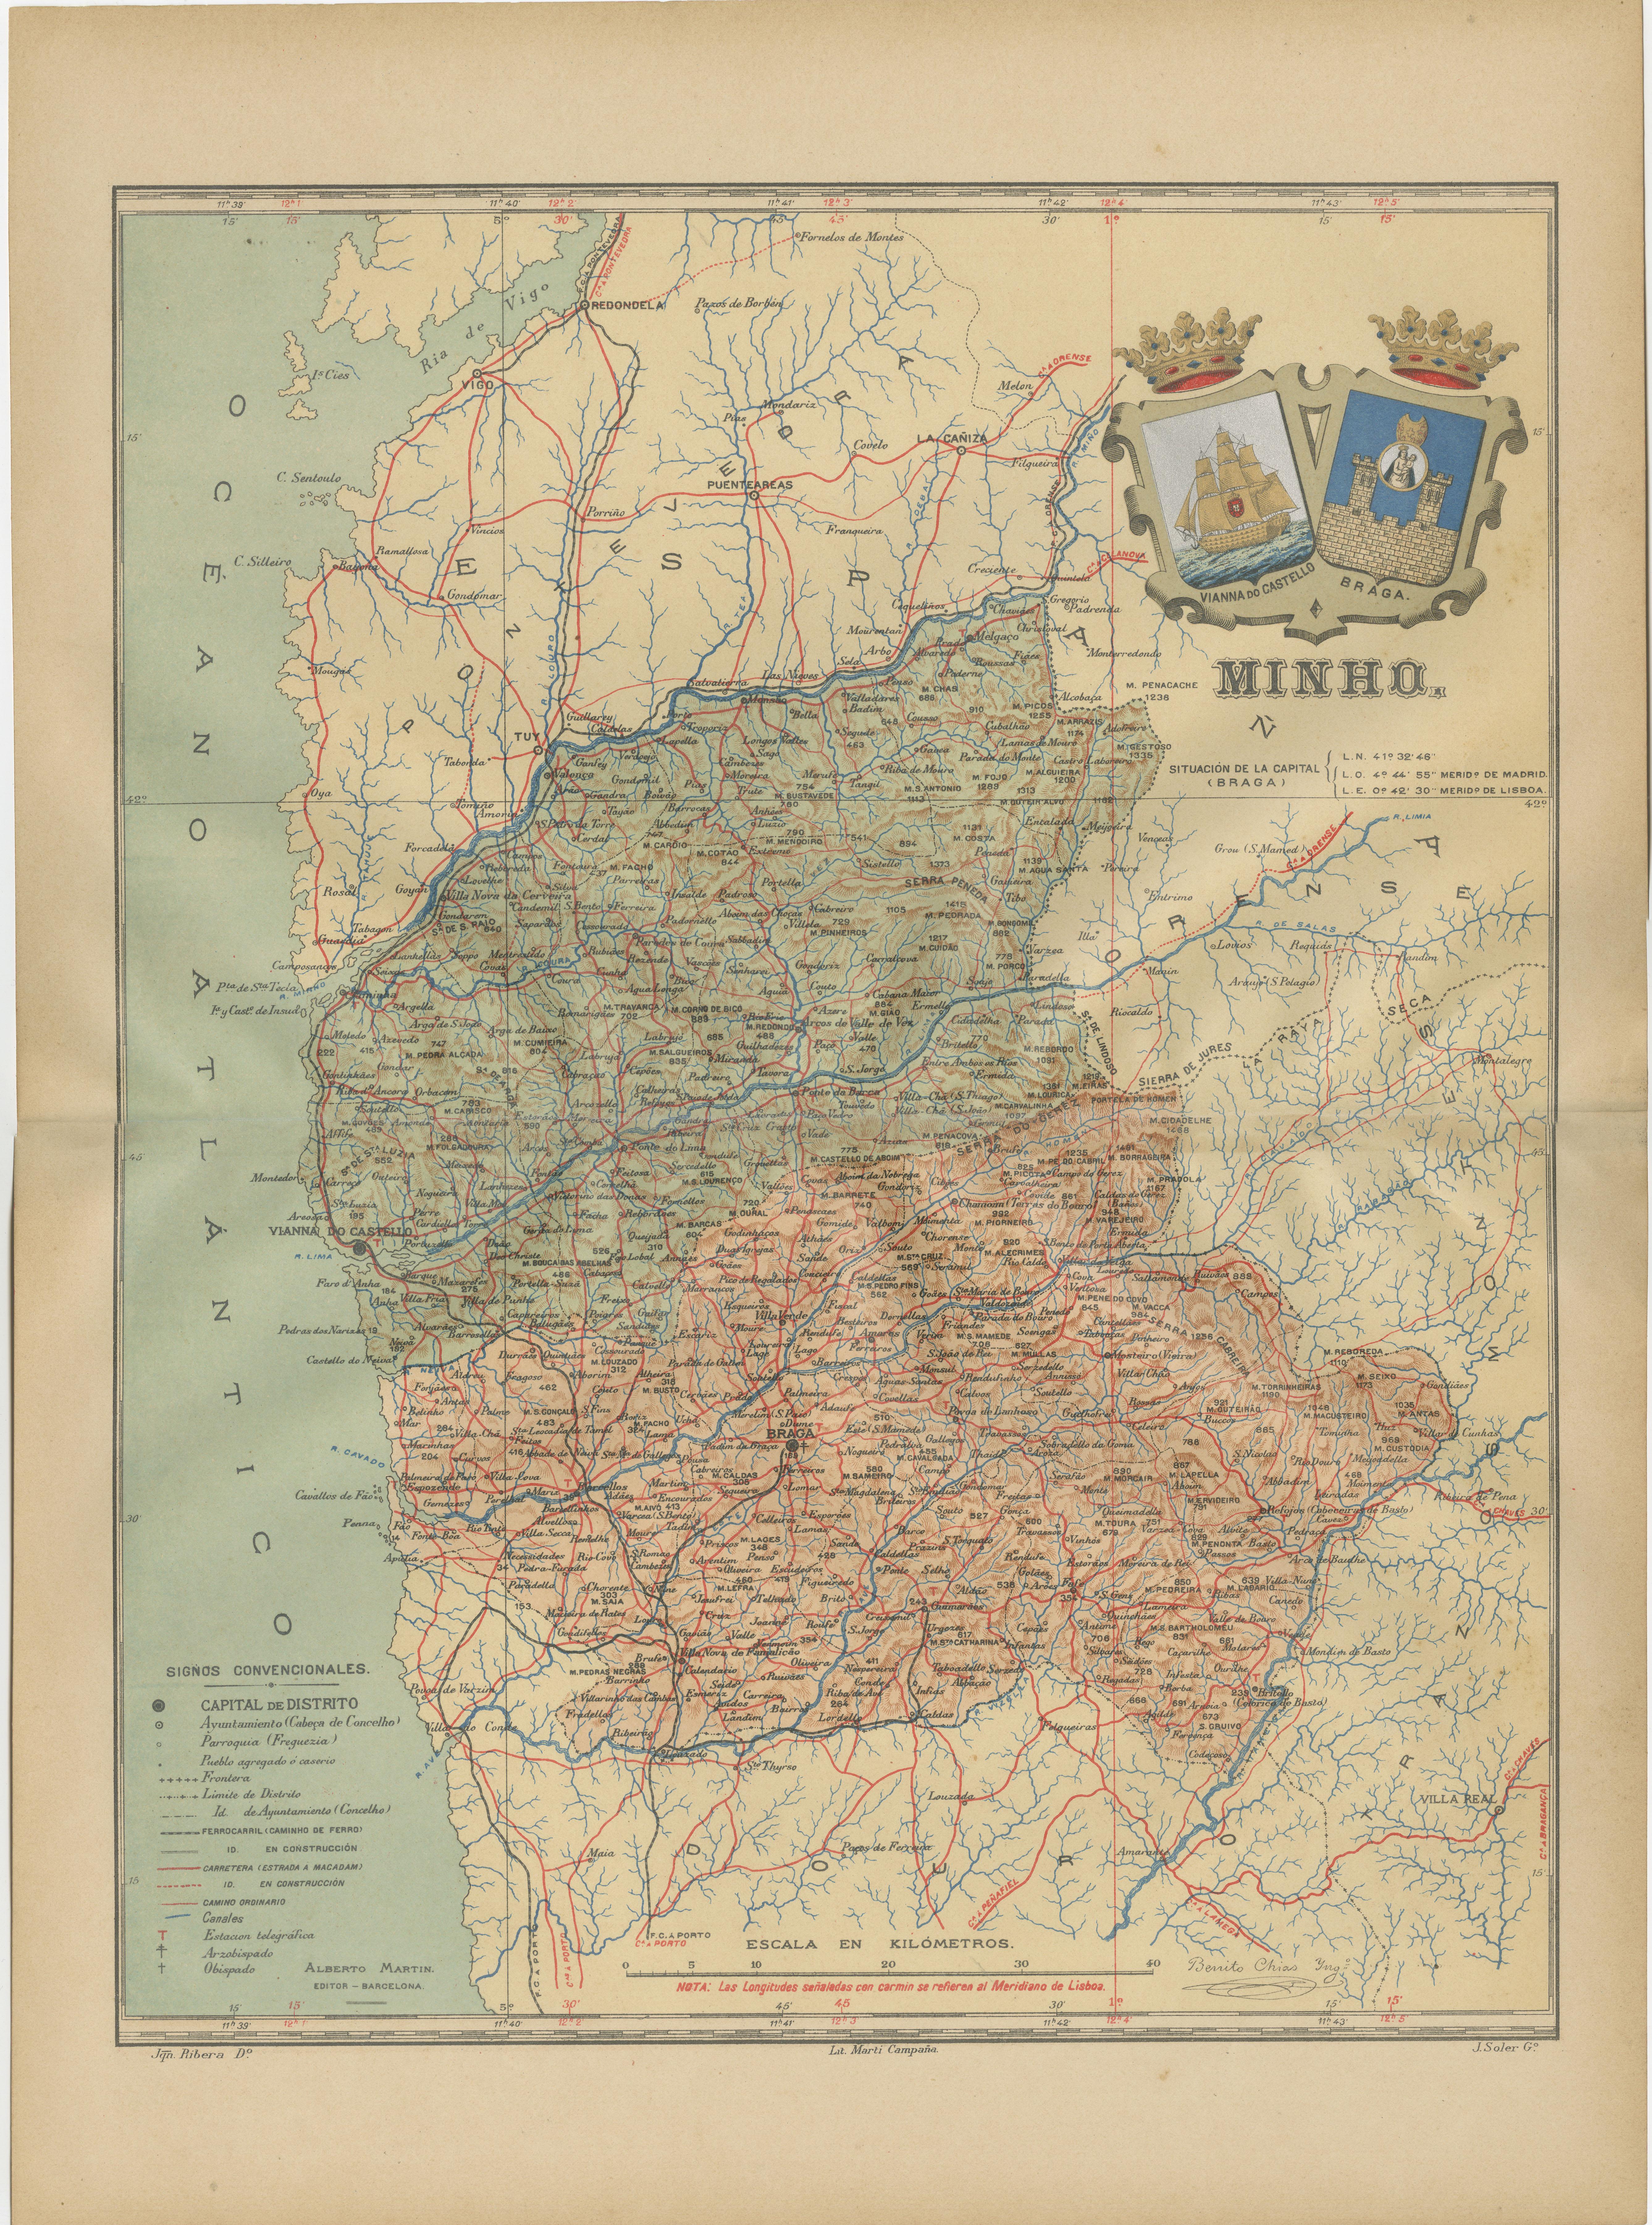 Ths authentic print is a historical map of the Minho region in the northwestern part of Portugal. The map includes detailed geographical features, such as rivers, mountain ranges, and the intricate network of roads and railways. The Minho region is